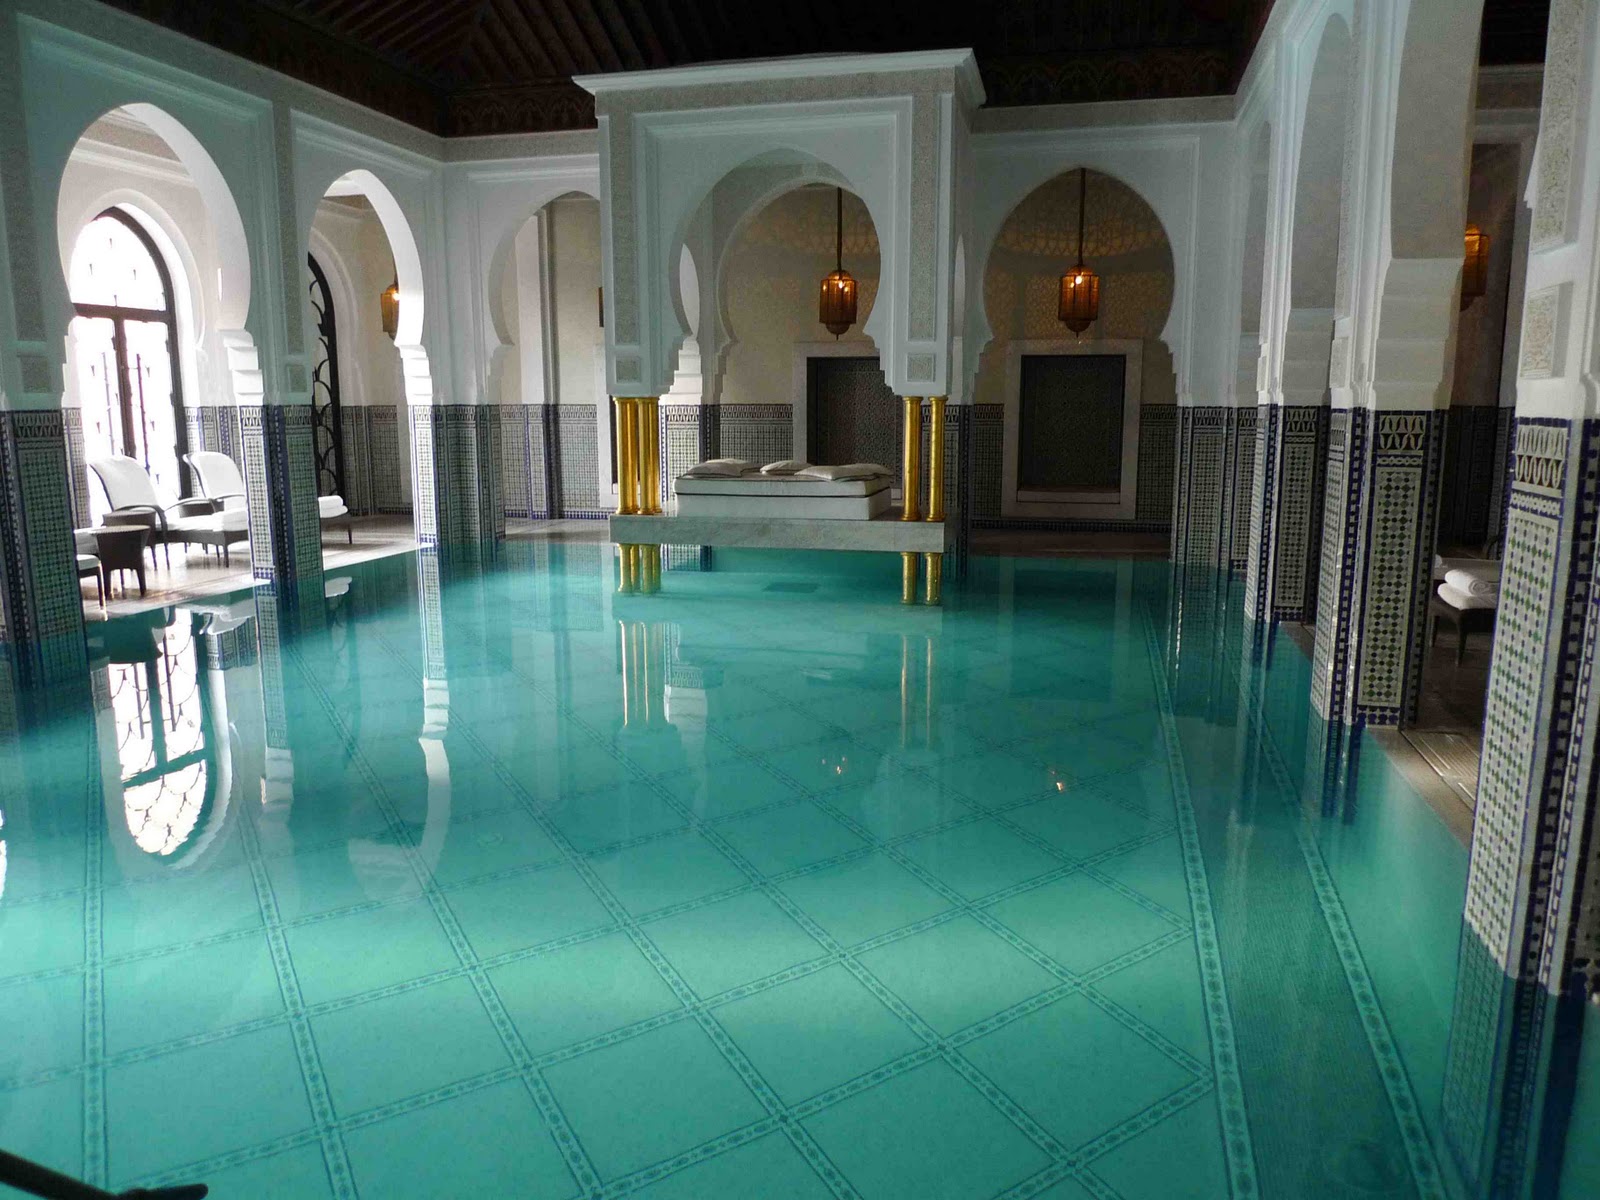 Indoor Swimming With Classic Indoor Swimming Pool Decorated With Small Gazebo And Traditional Pendant Lighting For Pool Inspiration Pool Indoor Swimming Pool Covered In Awesomeness